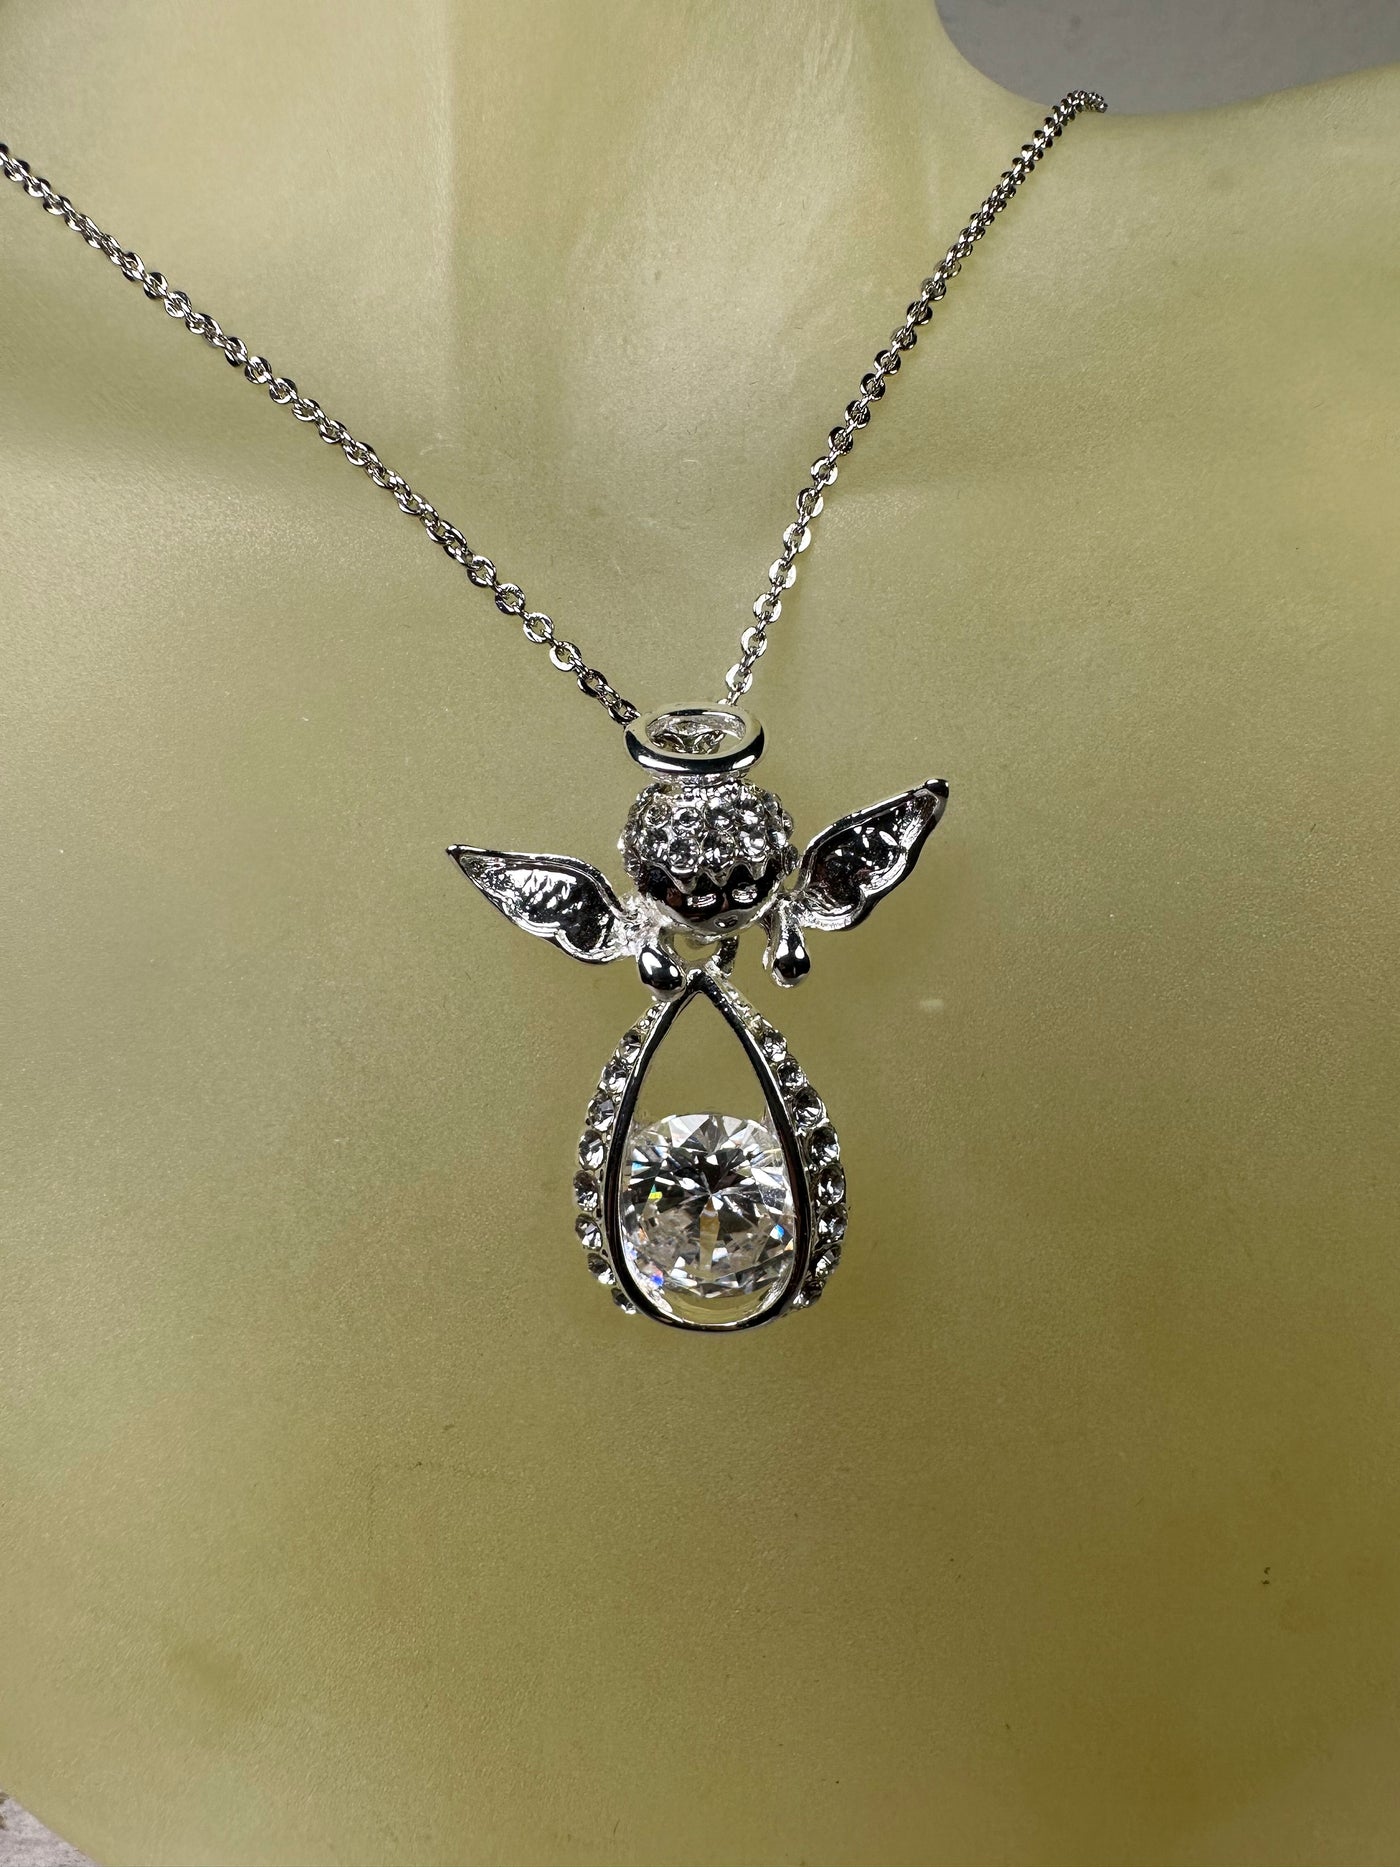 Crystal Angel Pendant Necklace in Silver Tone